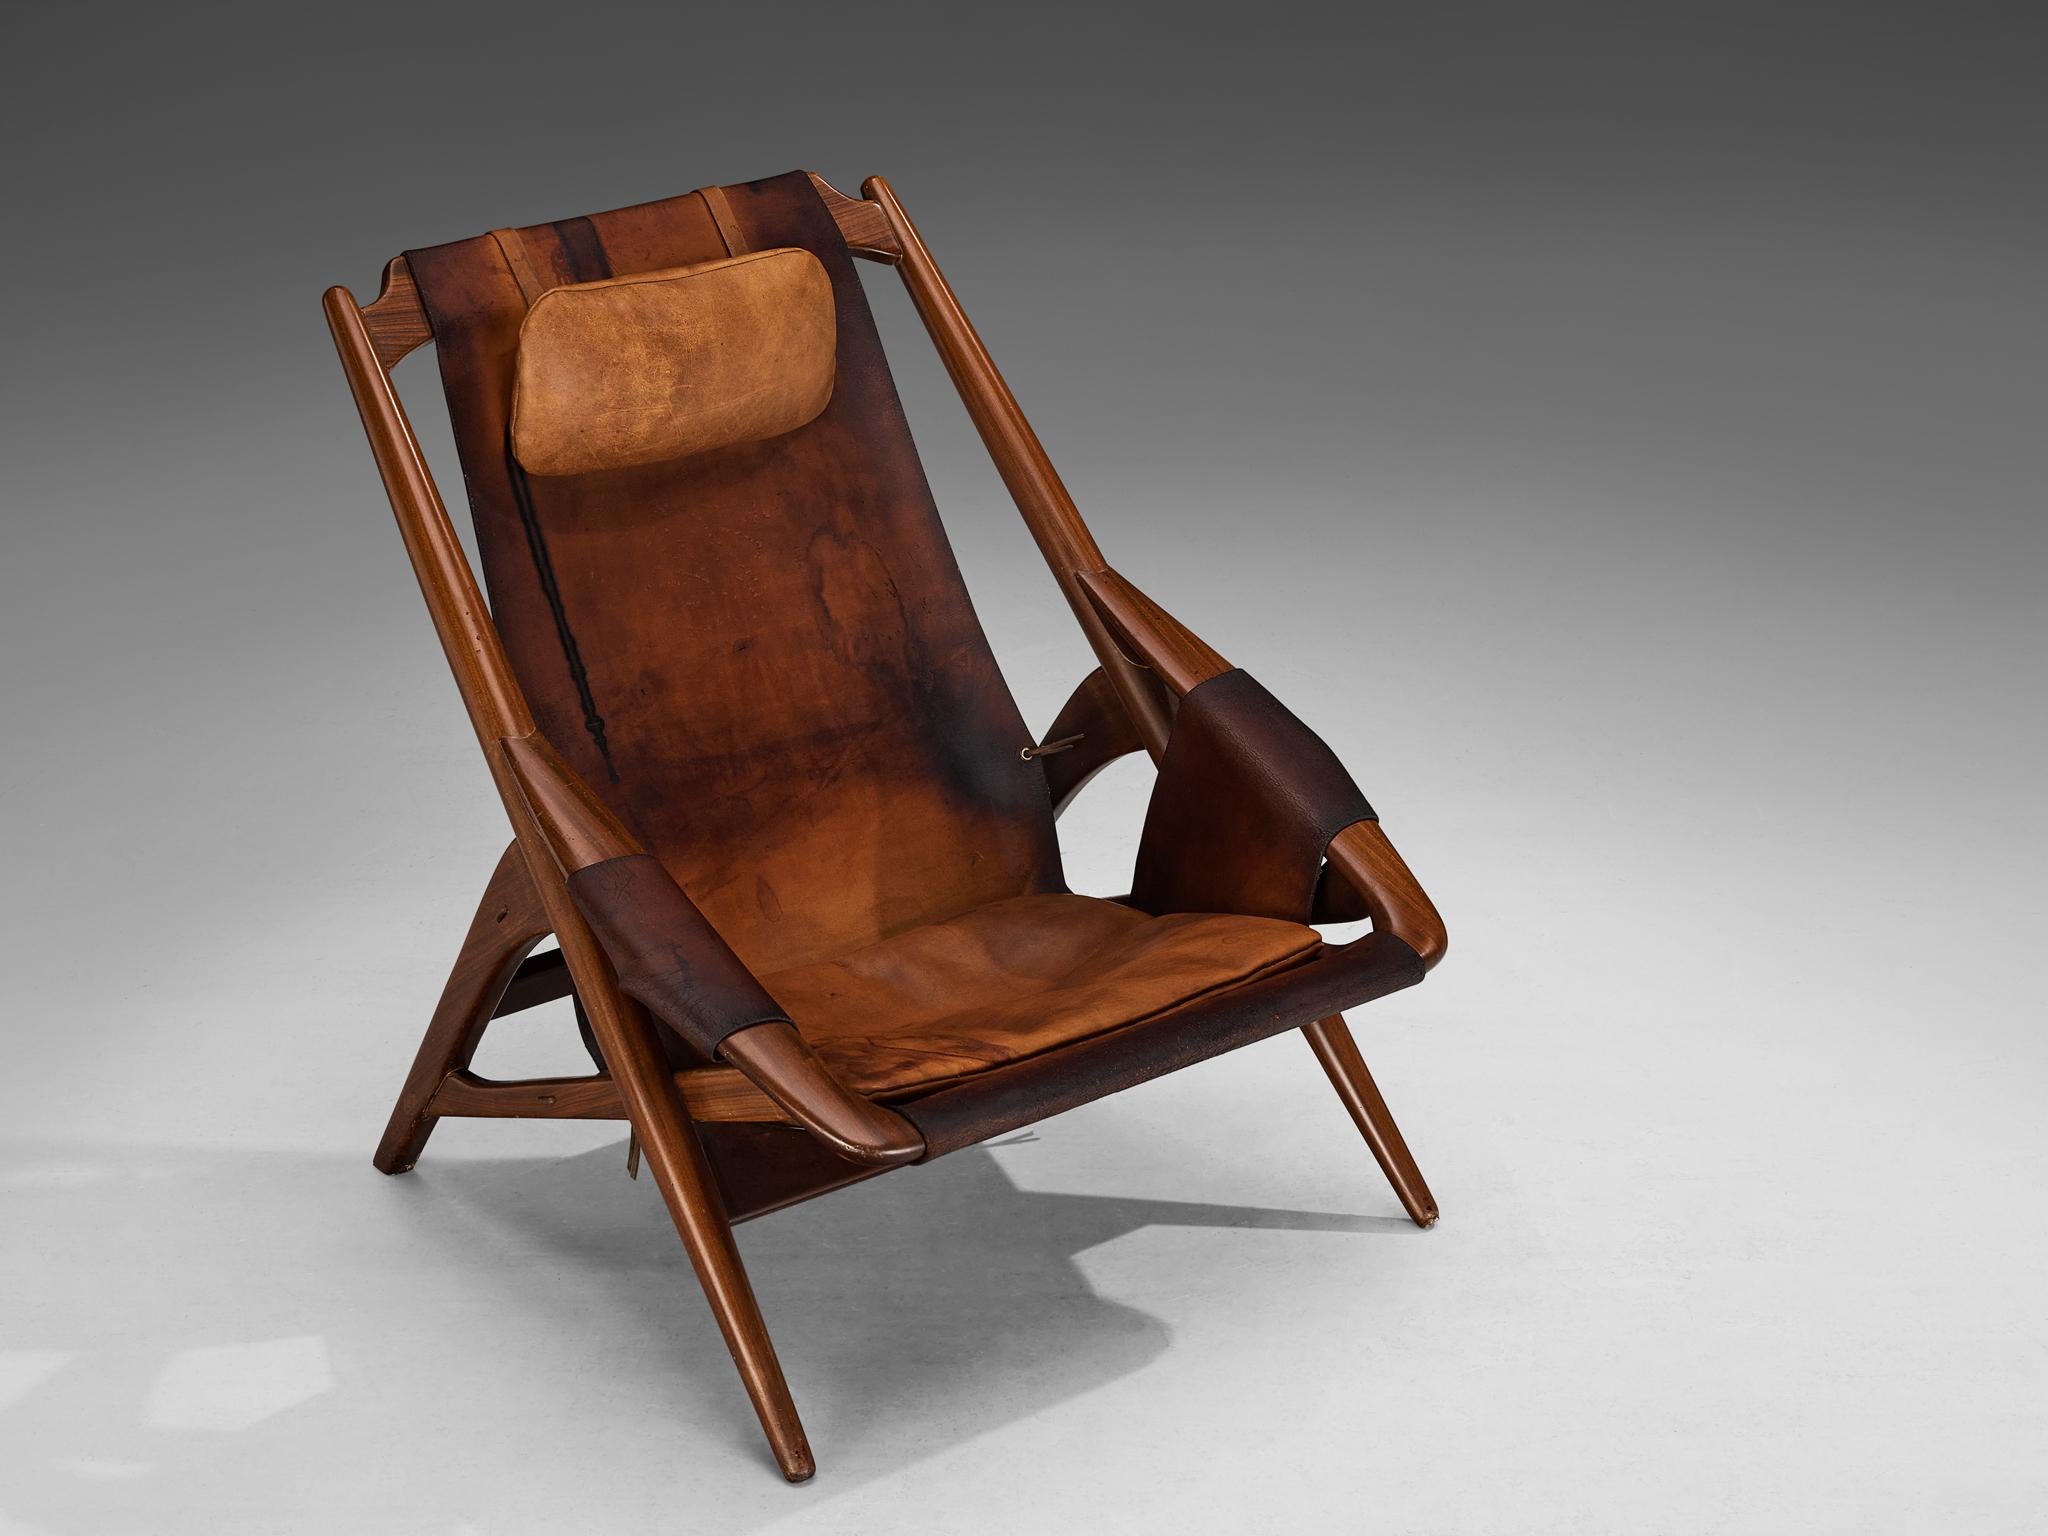 W. Andersag, lounge chair, teak, saddle leather, Italy, 1960s

An exquisite armchair designed by W.D. Ansersag. Its design bears a striking dynamism, highlighted by sharp lines evident in the wooden frame. The chair is reminiscent of robust hunting